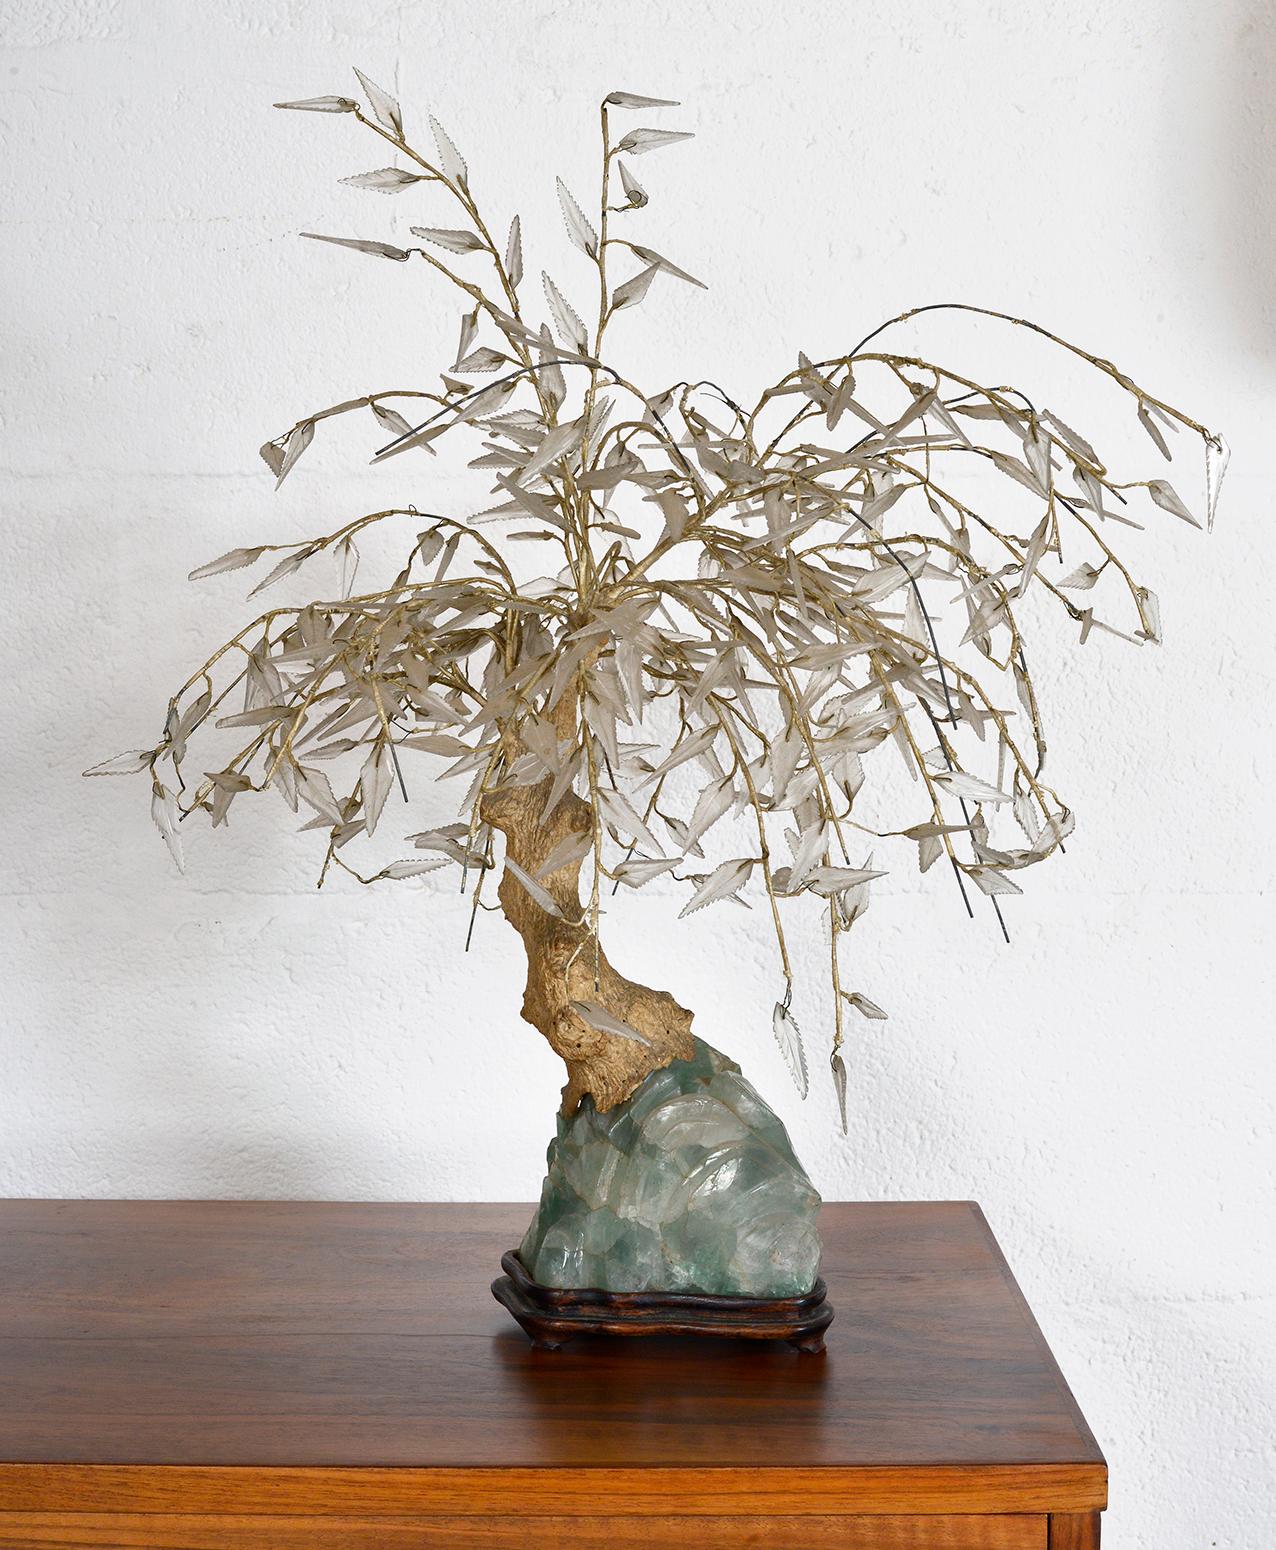 A wonderful, highly decorative, original Bonsai tree dating from the 1940s, which is both robust and delicate. Pieces of glass have been intricately carved to form realistic leaves, and the wire branches are neatly covered in silk threads, which